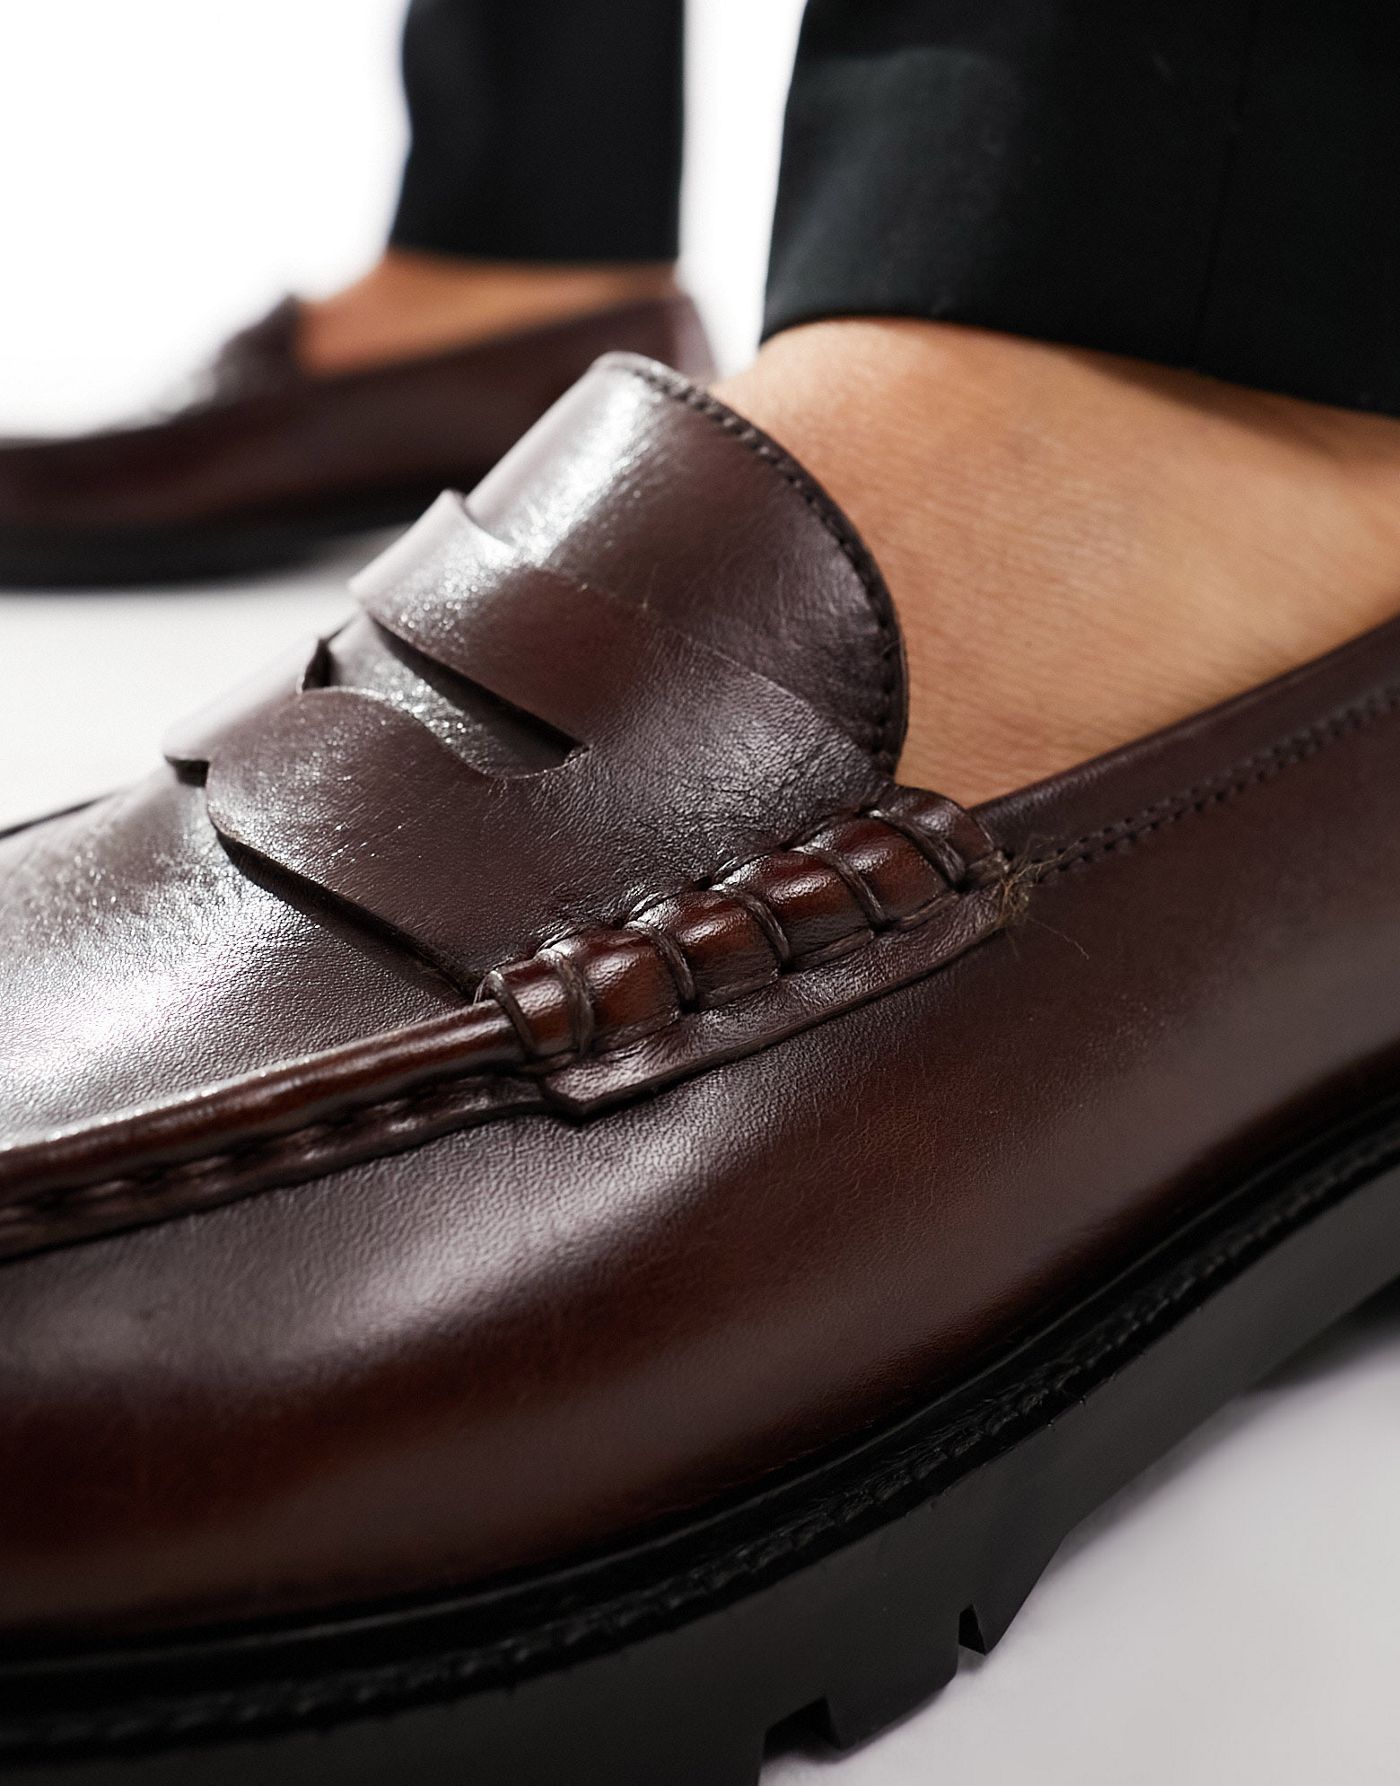 Walk London Campus loafers in brown leather